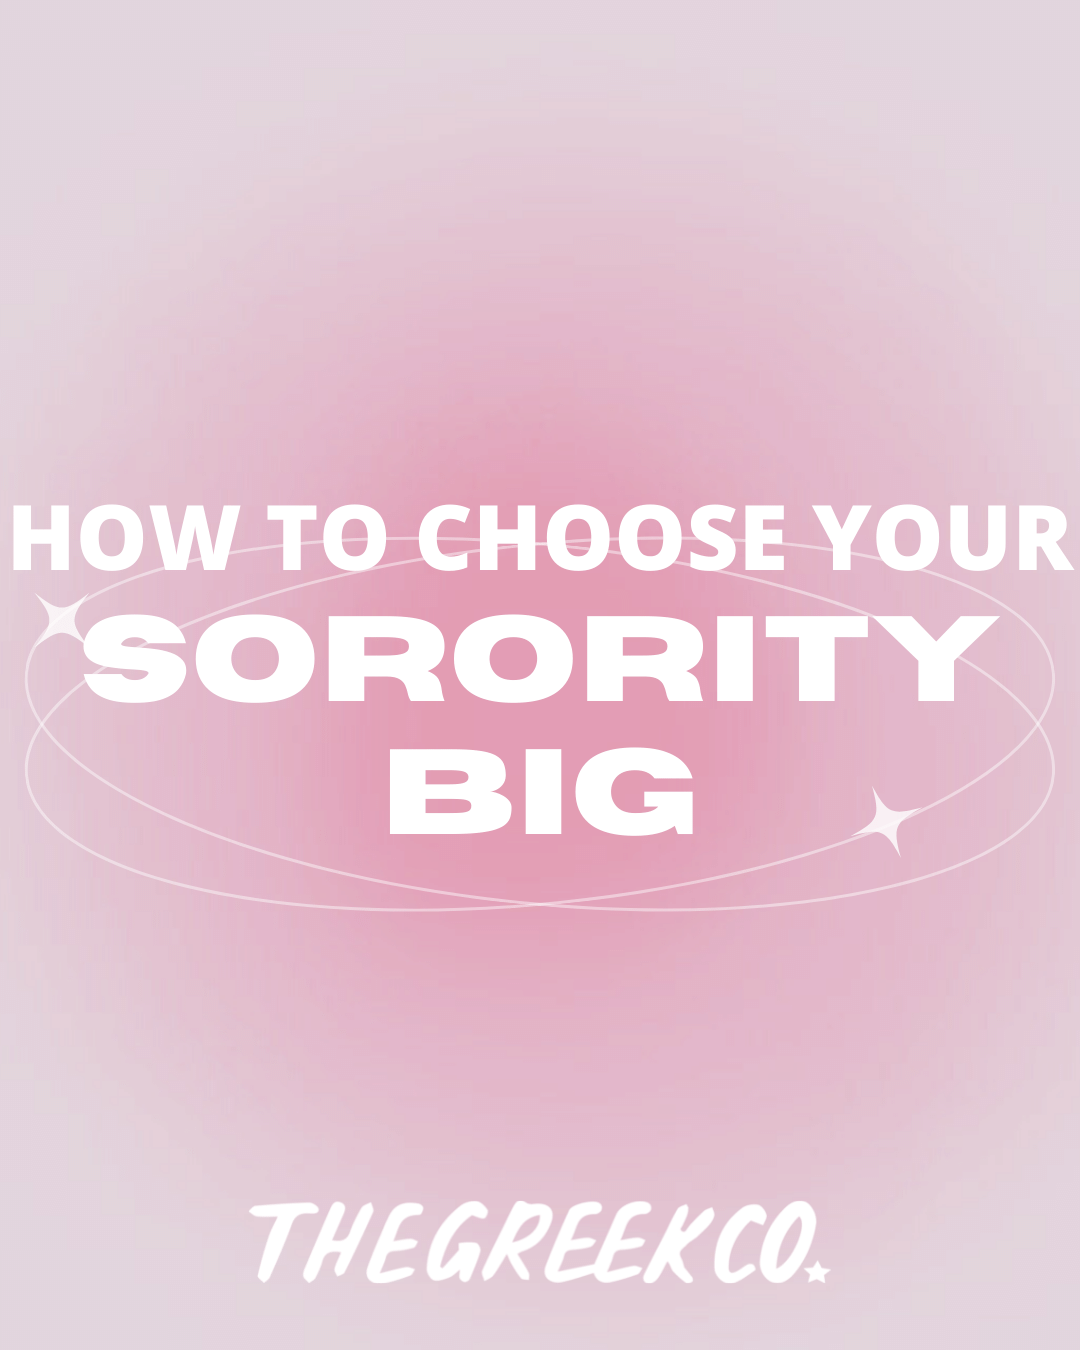 How to Choose Your Sorority Big - The Greek Co. Blog Post